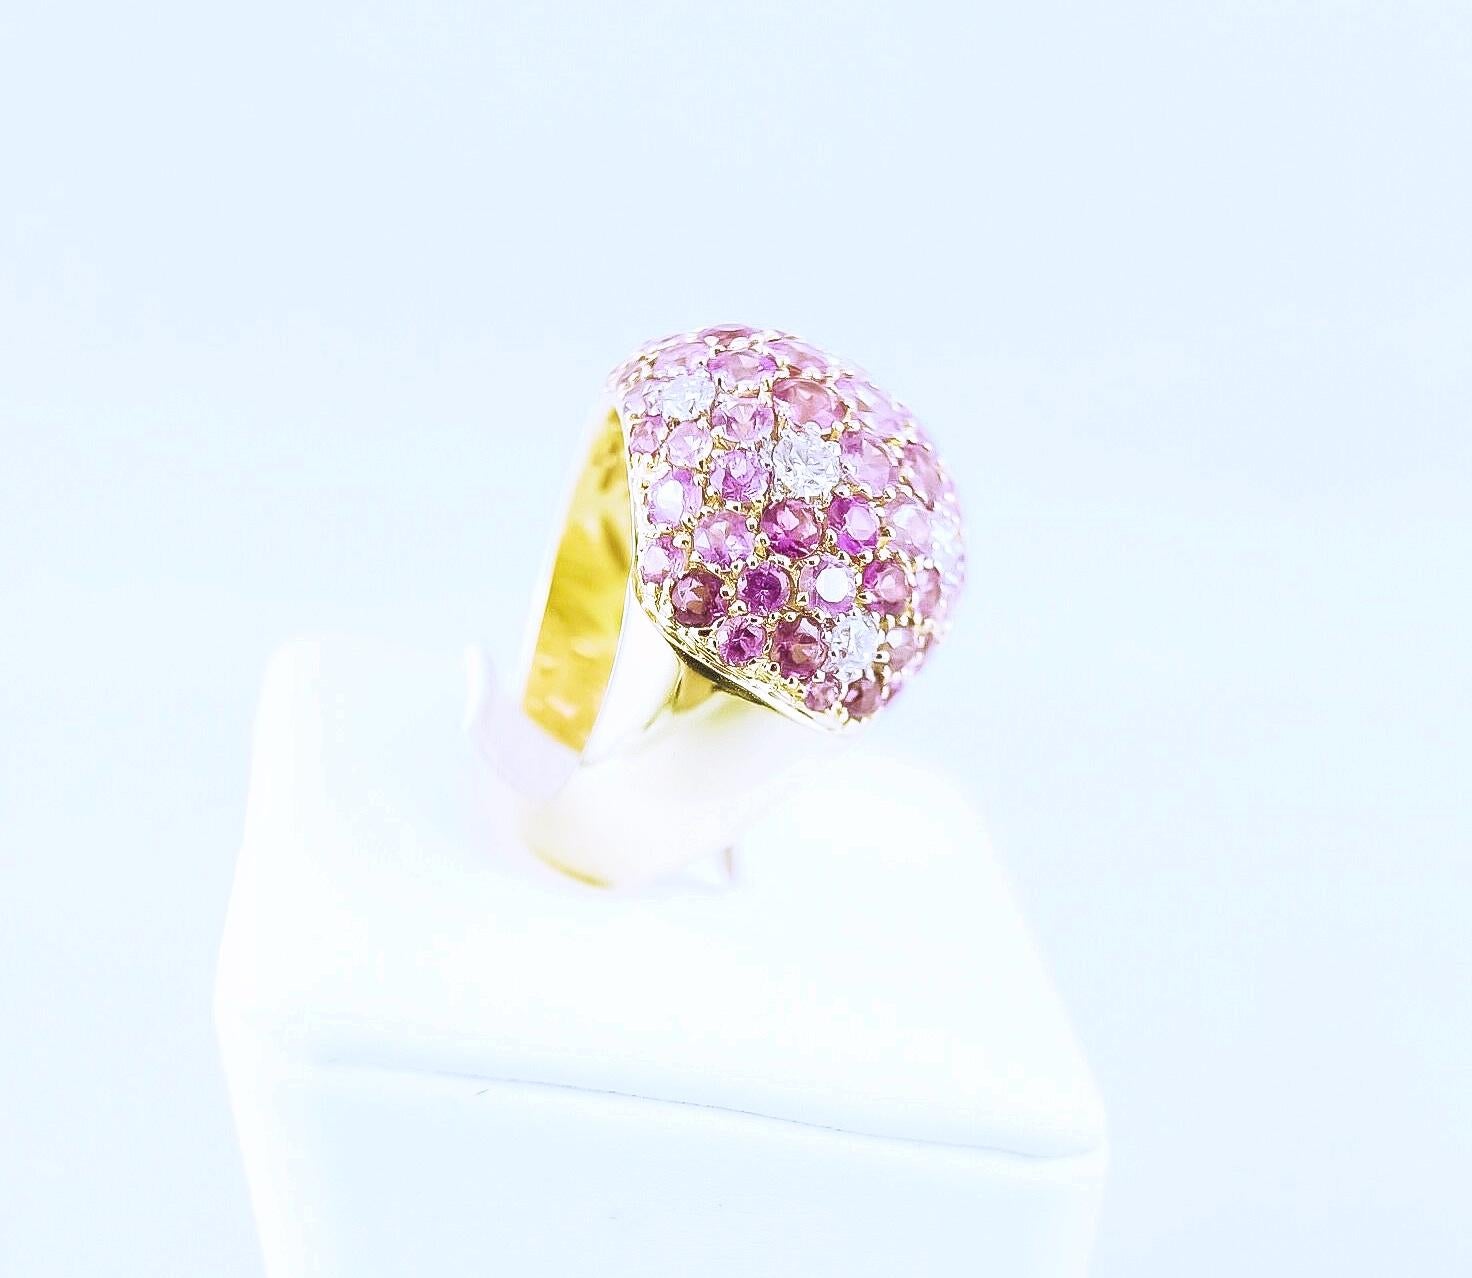 A stunningly designed ring made of 53 pink sapphires 5.31ct, 25 pink tourmalines 1.88ct and 9 diamonds 0.78ct mounted in 18K yellow gold. This feminine handcrafted jewel harmoniously combines a symphony of colors into a sparkling piece of art. This